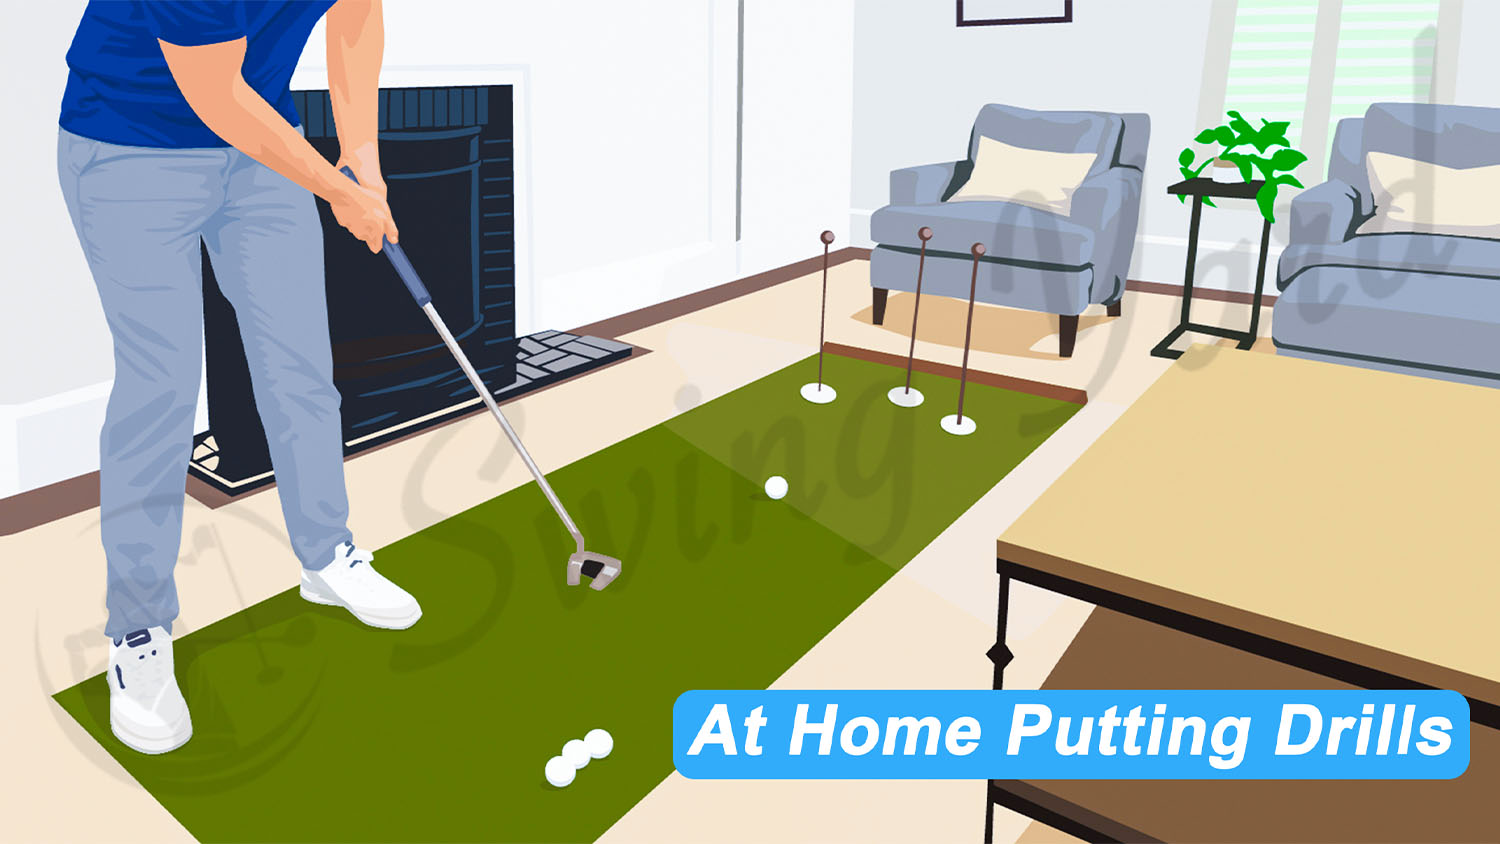 A guy practicing home putting drills in the living room